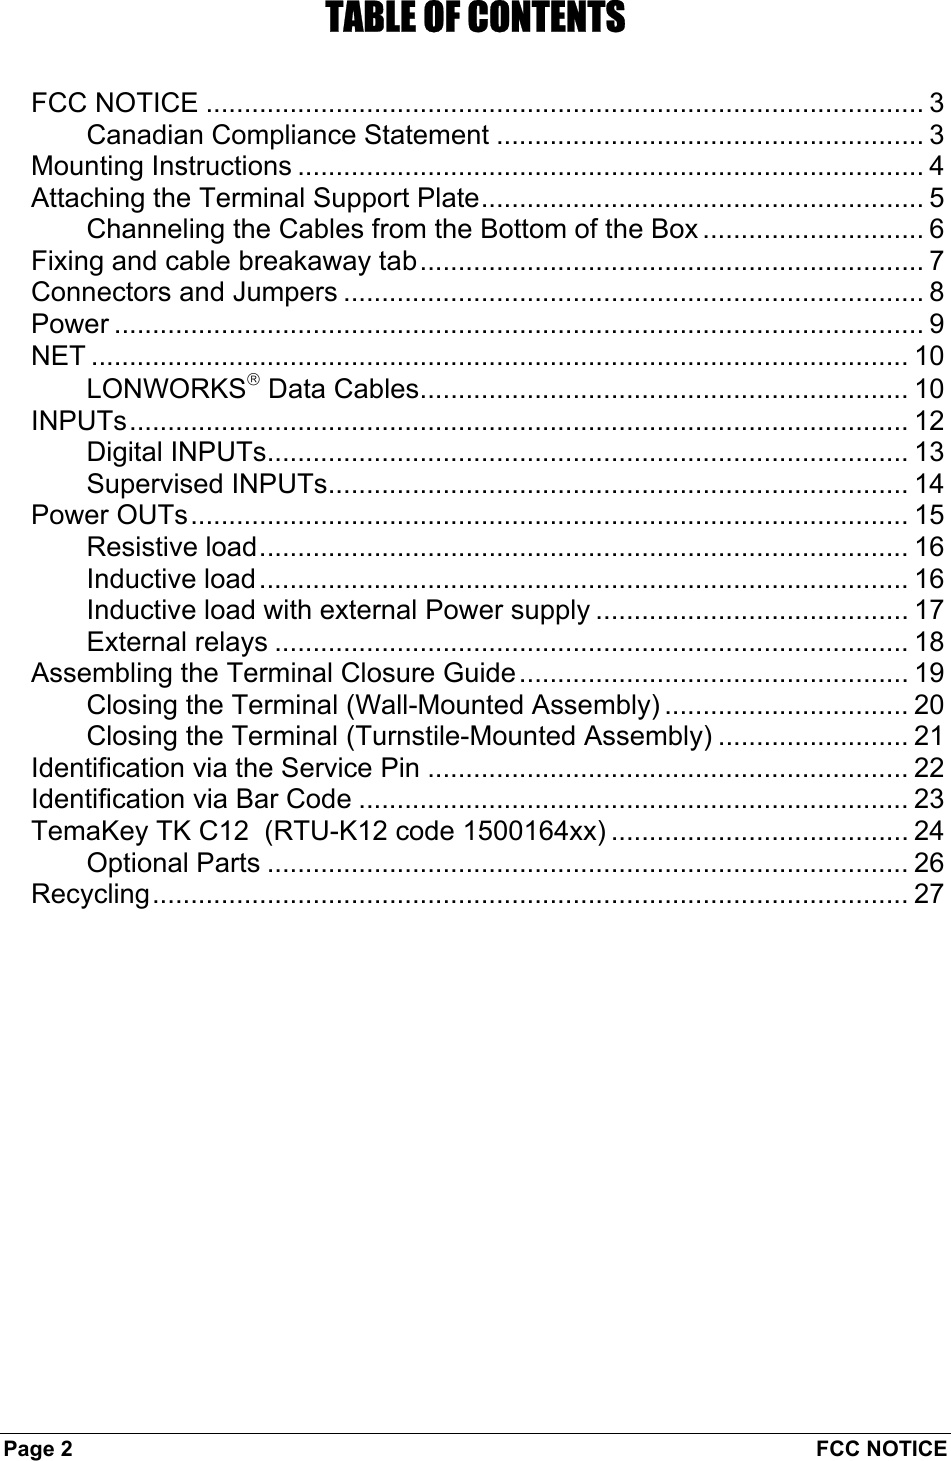 Page 2  FCC NOTICE TABLE OF CONTENTS FCC NOTICE .............................................................................................. 3 Canadian Compliance Statement ........................................................ 3 Mounting Instructions .................................................................................. 4 Attaching the Terminal Support Plate.......................................................... 5 Channeling the Cables from the Bottom of the Box ............................. 6 Fixing and cable breakaway tab.................................................................. 7 Connectors and Jumpers ............................................................................ 8 Power .......................................................................................................... 9 NET ........................................................................................................... 10 LONWORKS Data Cables................................................................ 10 INPUTs...................................................................................................... 12 Digital INPUTs.................................................................................... 13 Supervised INPUTs............................................................................ 14 Power OUTs.............................................................................................. 15 Resistive load..................................................................................... 16 Inductive load..................................................................................... 16 Inductive load with external Power supply ......................................... 17 External relays ................................................................................... 18 Assembling the Terminal Closure Guide................................................... 19 Closing the Terminal (Wall-Mounted Assembly) ................................ 20 Closing the Terminal (Turnstile-Mounted Assembly) ......................... 21 Identification via the Service Pin ............................................................... 22 Identification via Bar Code ........................................................................ 23 TemaKey TK C12  (RTU-K12 code 1500164xx) ....................................... 24 Optional Parts .................................................................................... 26 Recycling................................................................................................... 27  